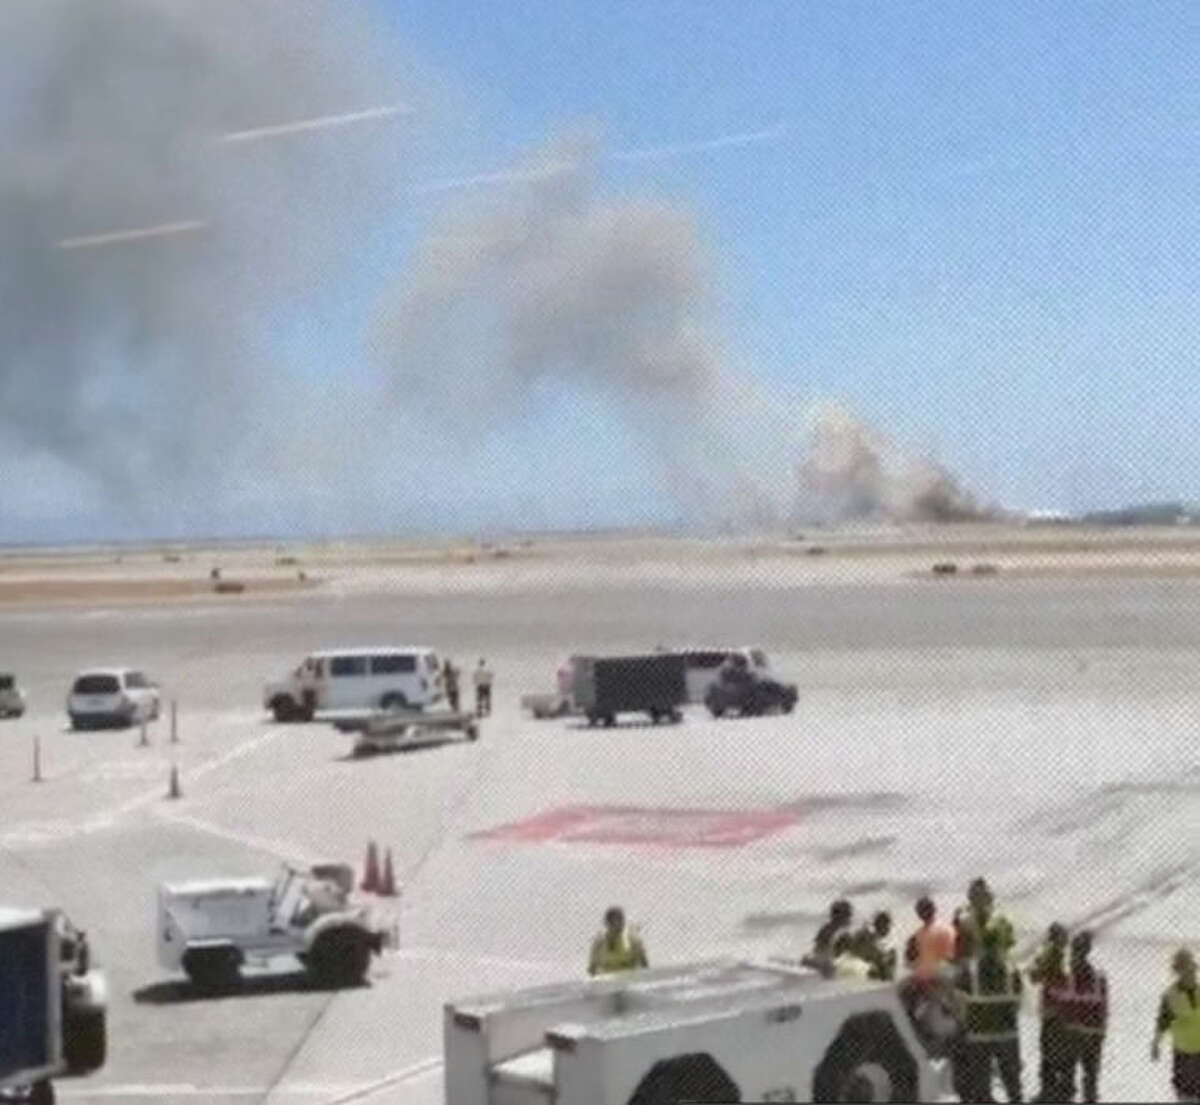 This photo provided by Wei Yeh shows what a federal aviation official says was an Asiana Airlines flight crashing while landing at San Francisco airport on Saturday, July 6, 2013. It was not immediately known whether there were any injuries. (AP Photo/Wei Yeh)